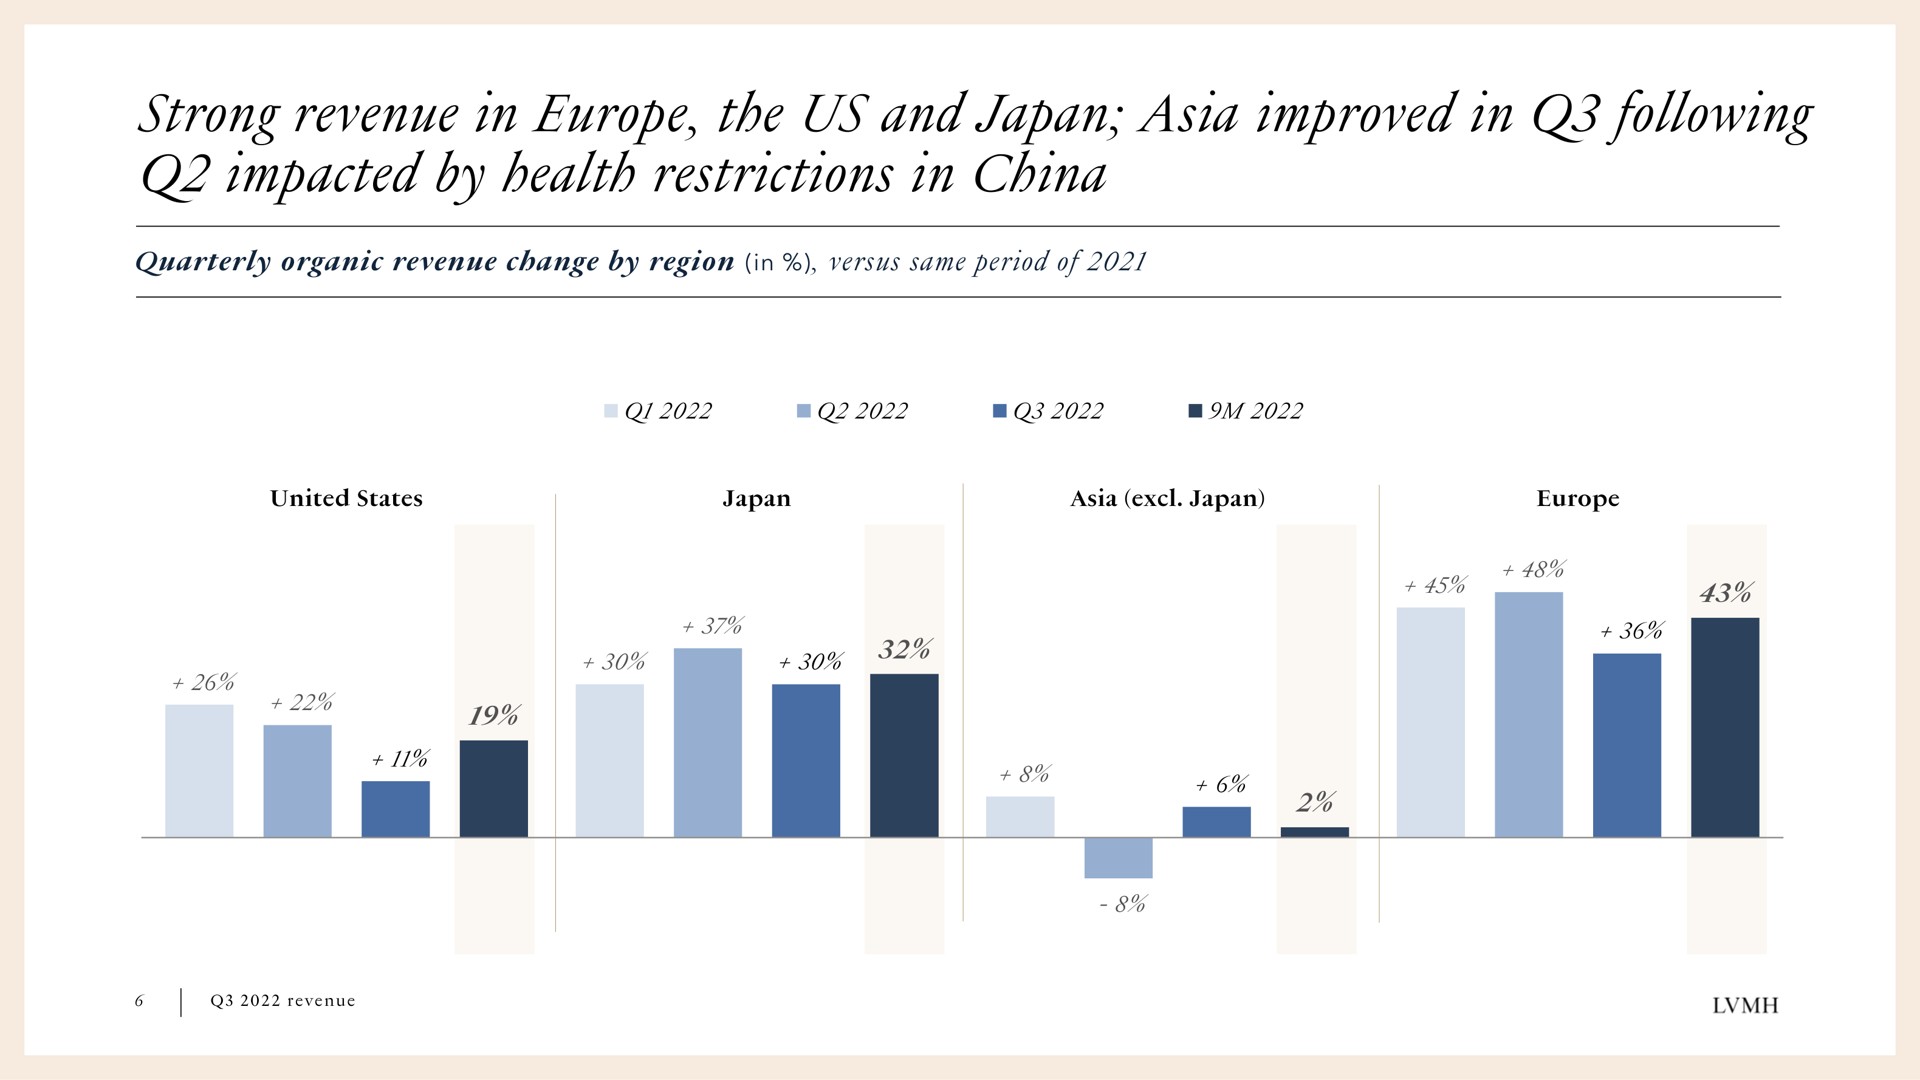 strong revenue in the us and japan improved in following impacted by health restrictions in china | LVMH